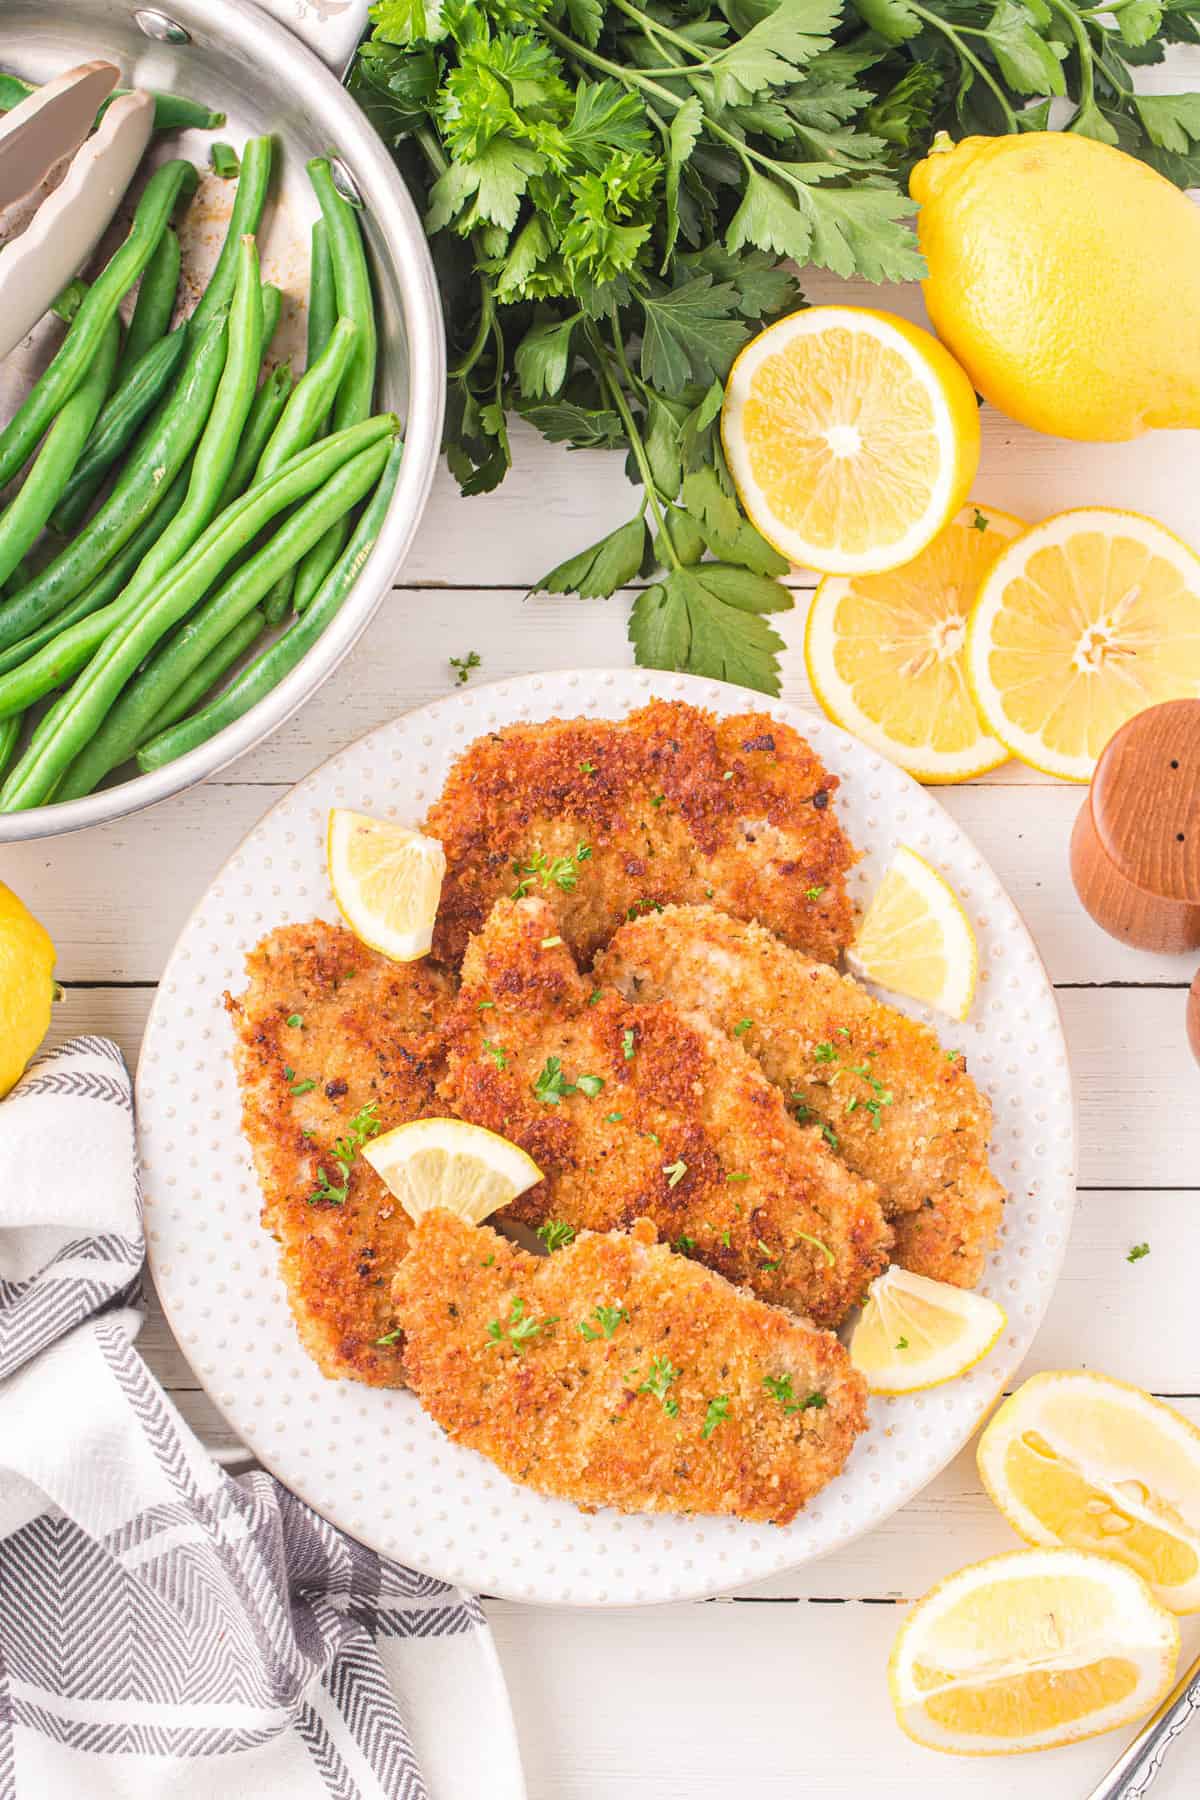 Tender and Juicy Pork Schnitzel Topped with Lemon Wedges